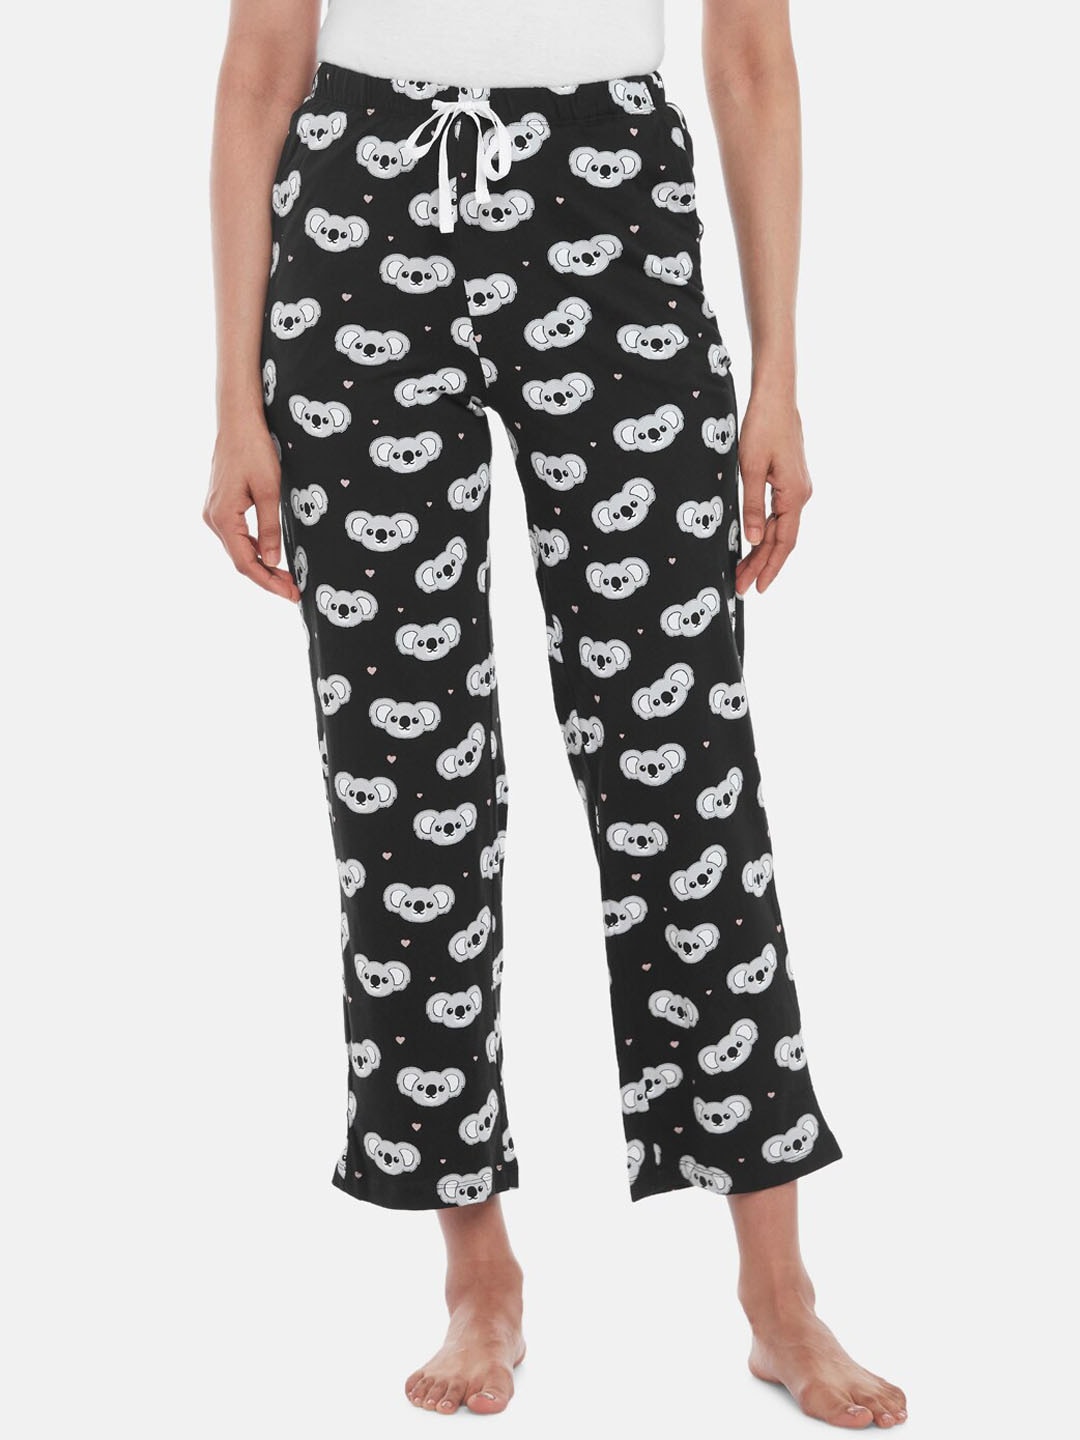 Dreamz by Pantaloons Women Black & Grey Printed Pure Cotton Lounge Pants Price in India